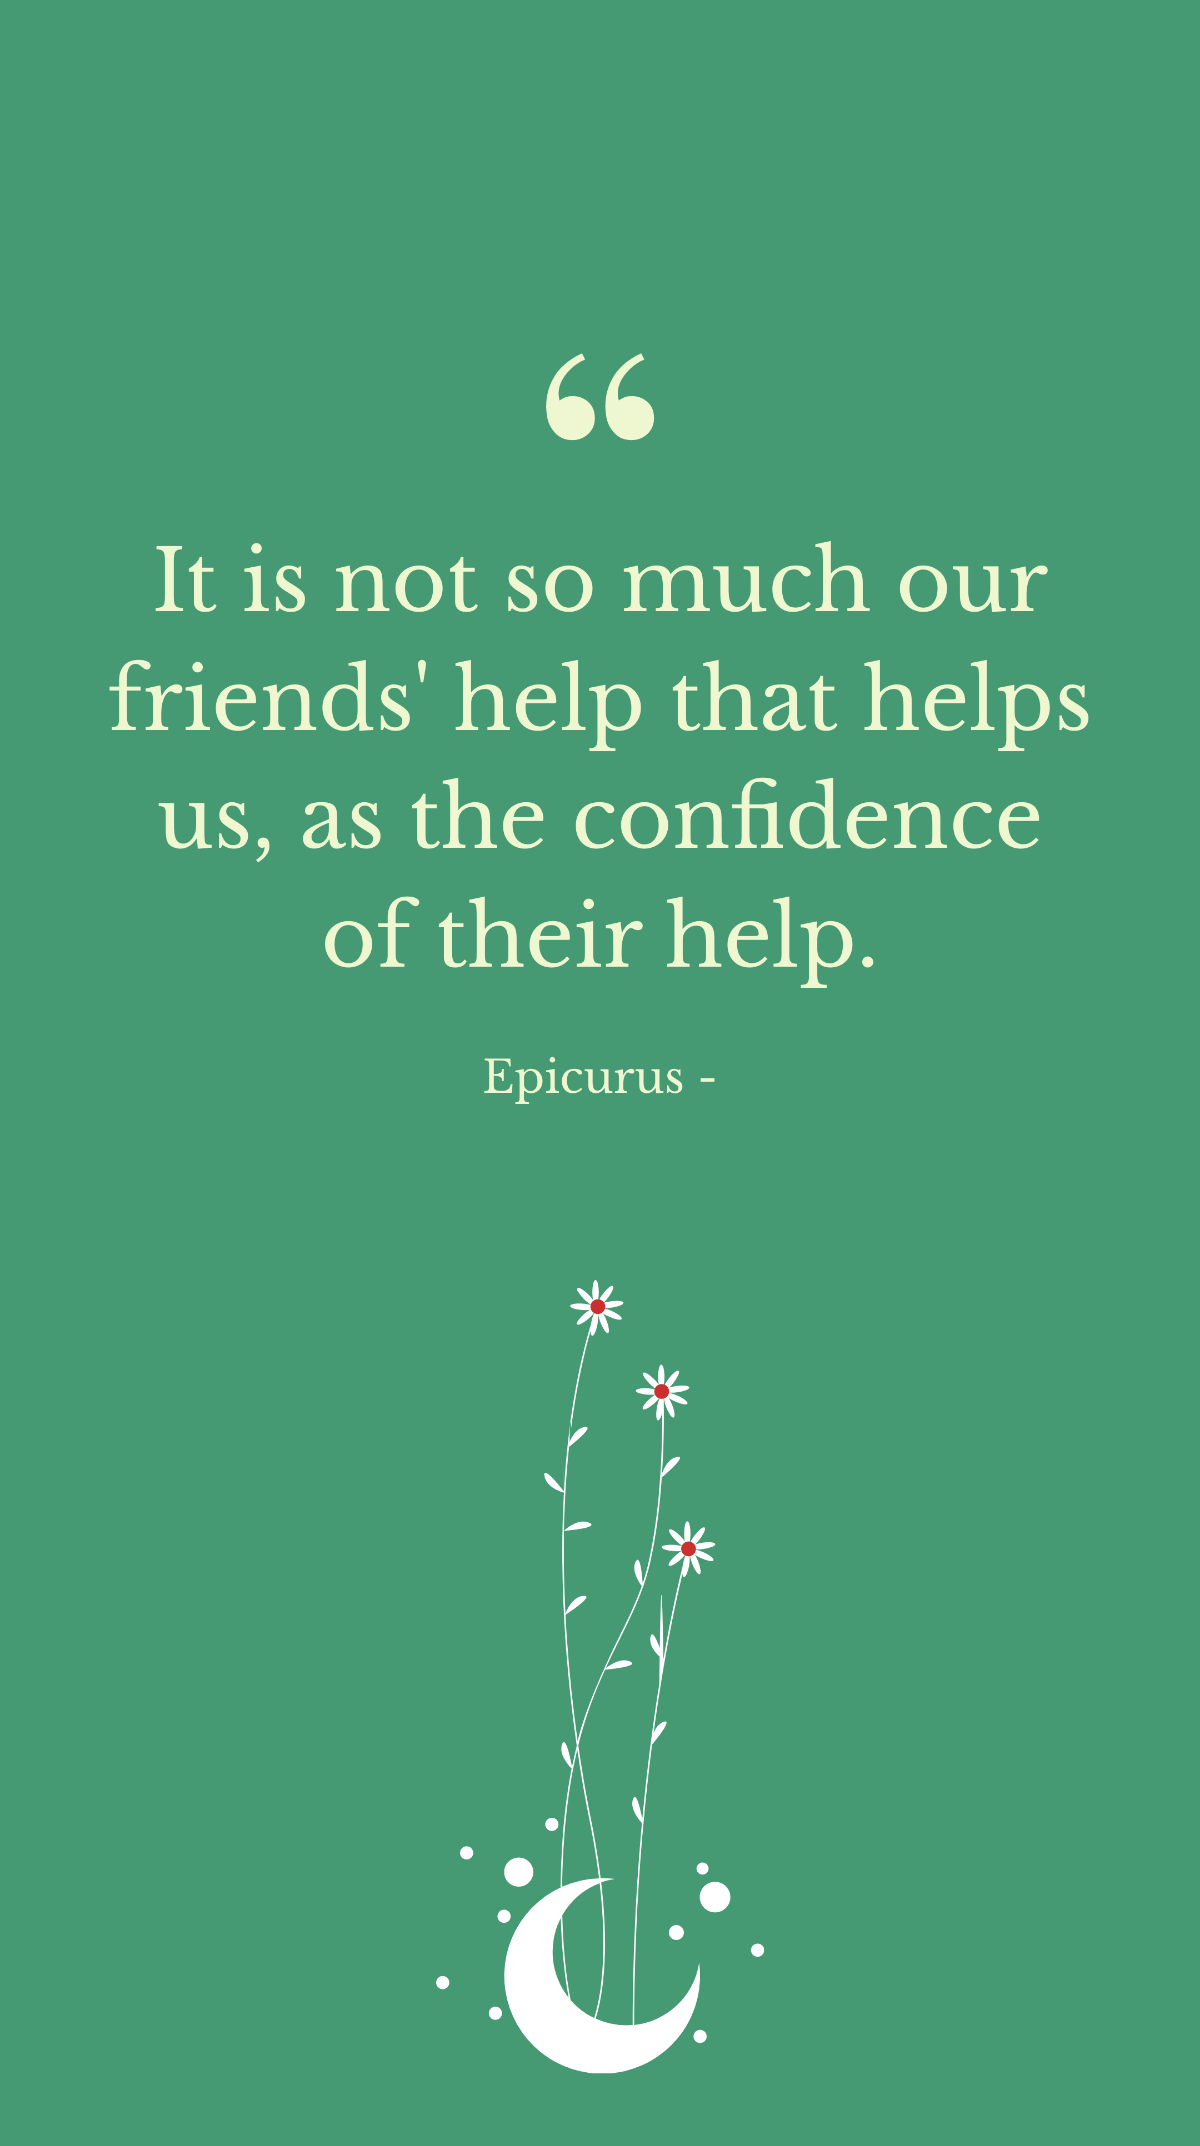 Epicurus - It is not so much our friends' help that helps us, as the confidence of their help. Template